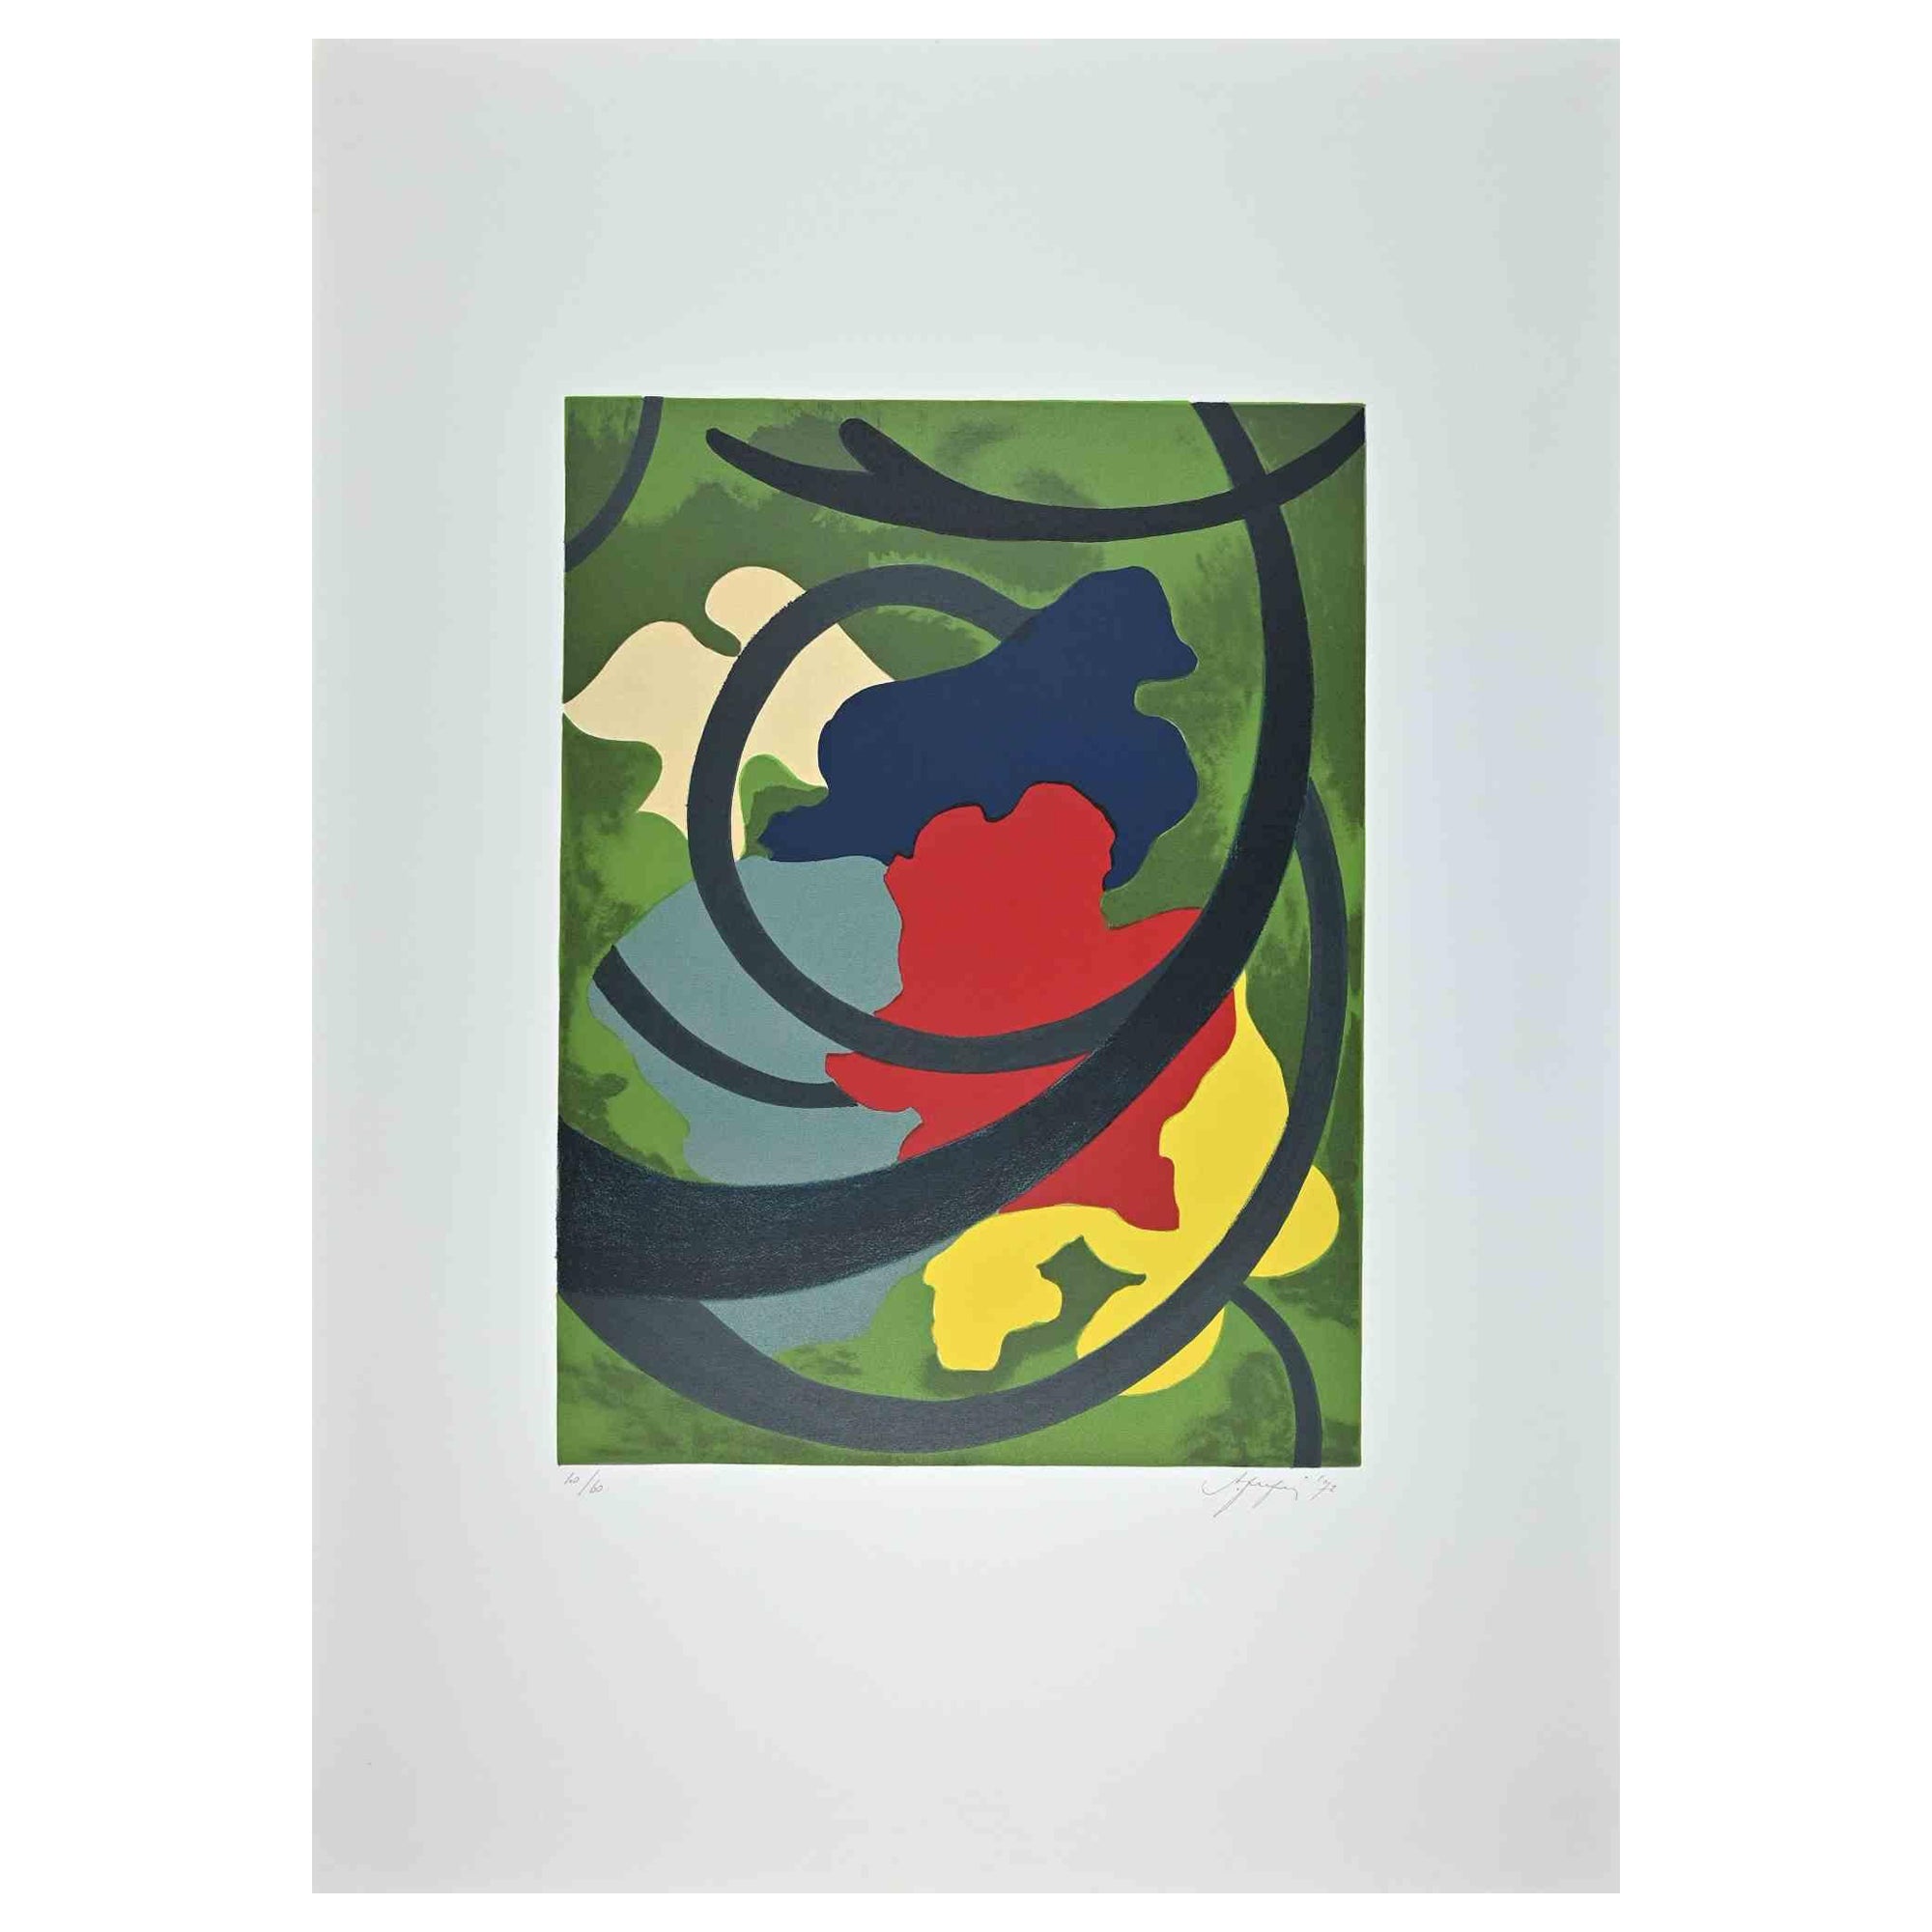 Amintore Fanfani Abstract Print - Abstract Composition - Original Screen Print by A. Fanfani - 1972